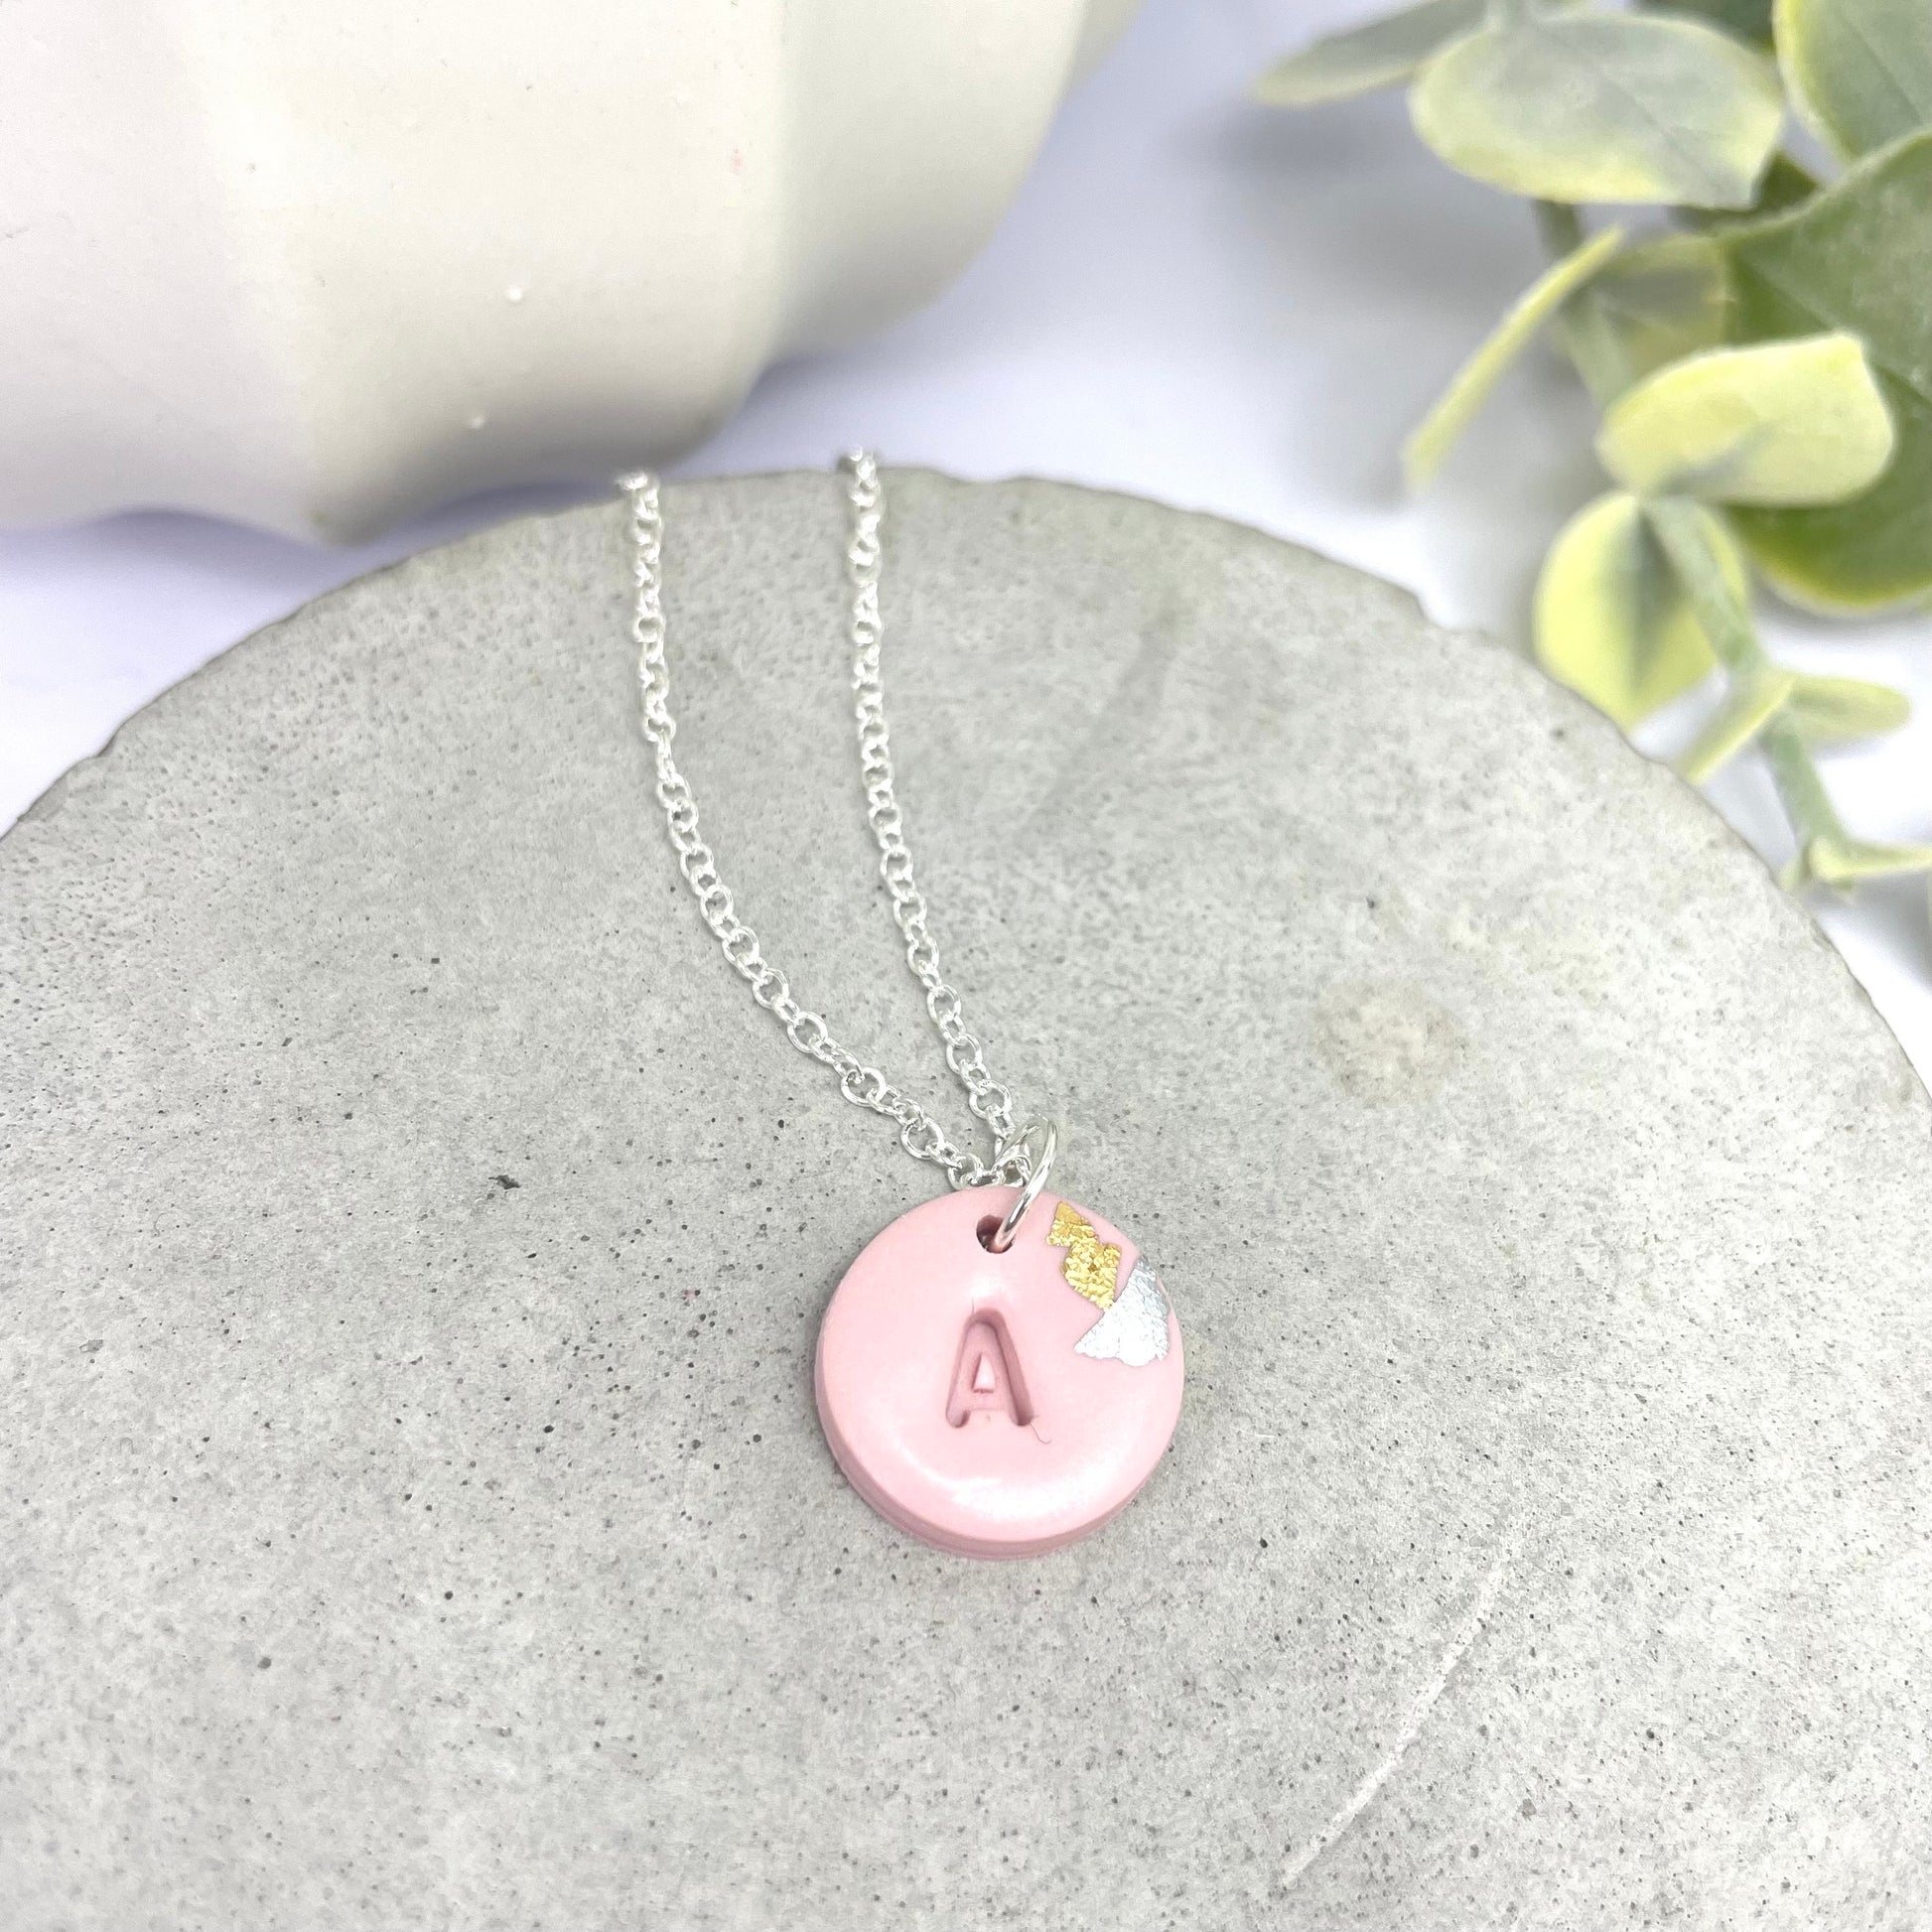 Initial necklace, letter necklace, beautiful birthday gift for her, best friend gift, girlfriend gift, bridesmaid gift, A necklace